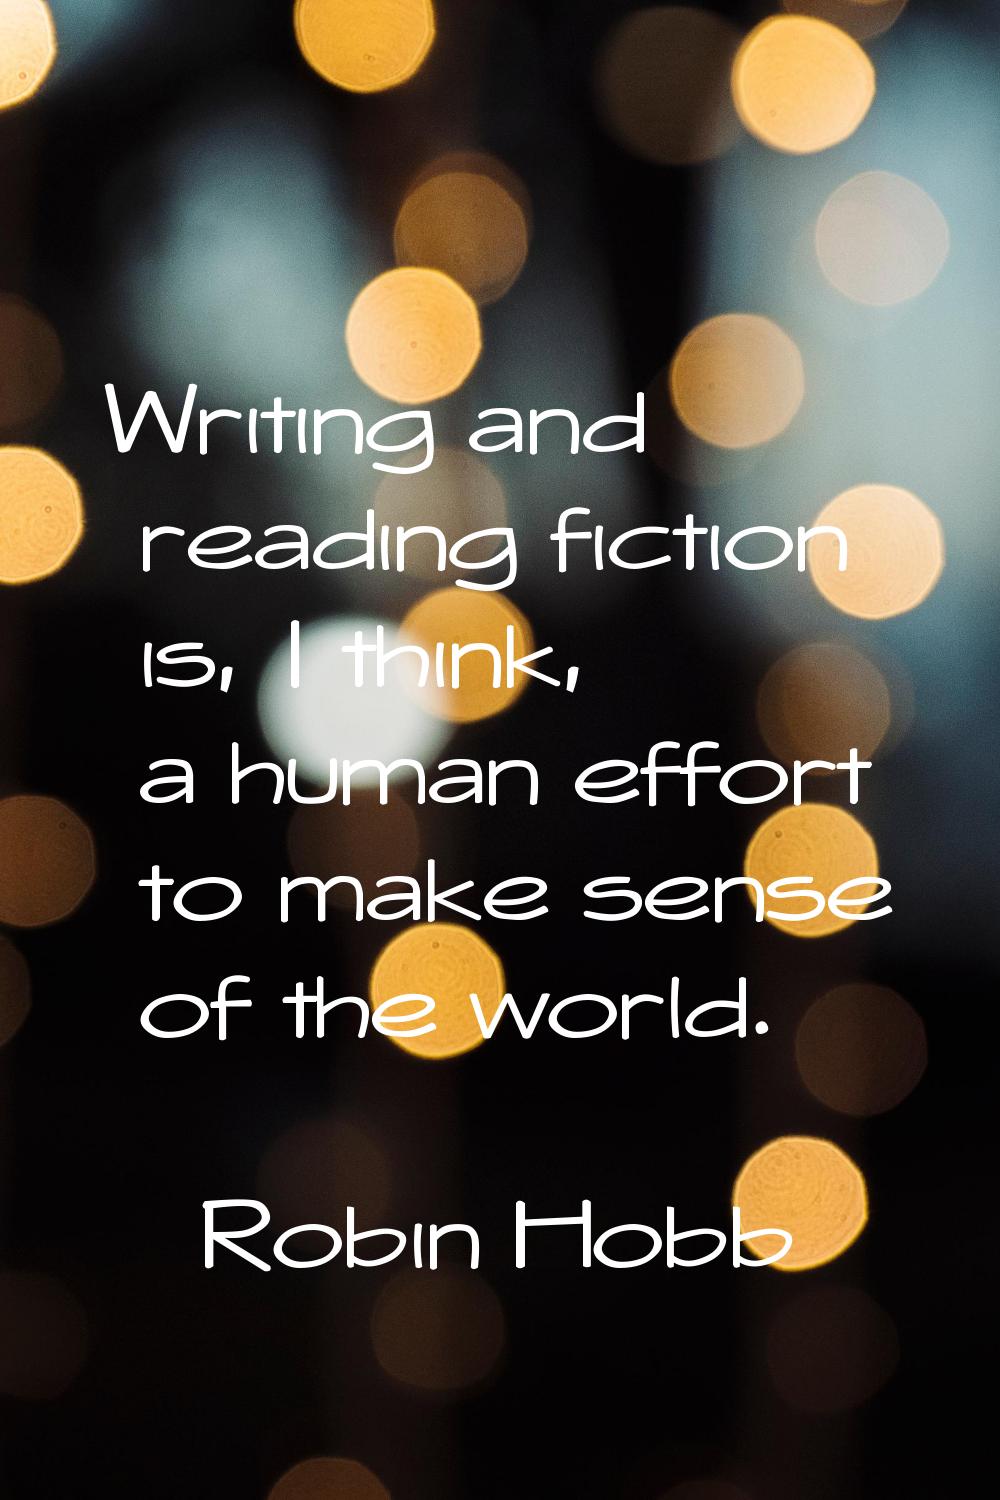 Writing and reading fiction is, I think, a human effort to make sense of the world.